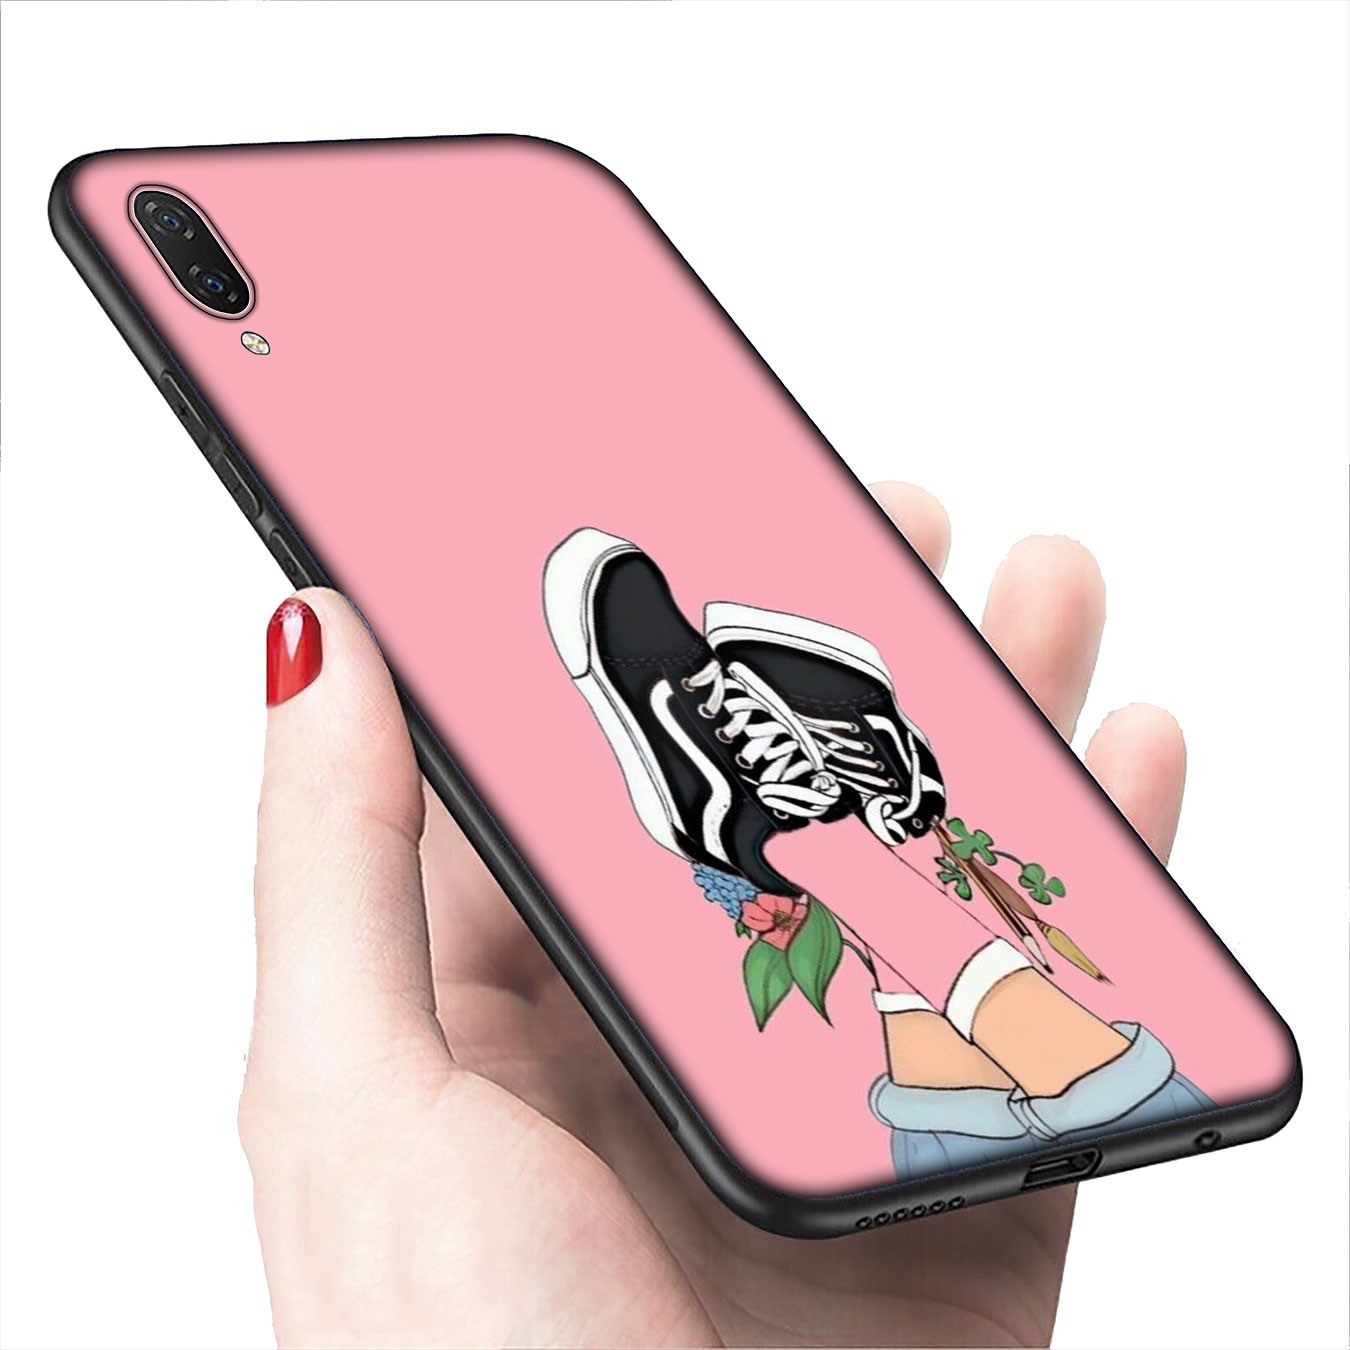 Soft Silicone iPhone 11 Pro XR X XS Max 7 8 6 6s Plus + Cover Shoes Fashion VANS Phone Case